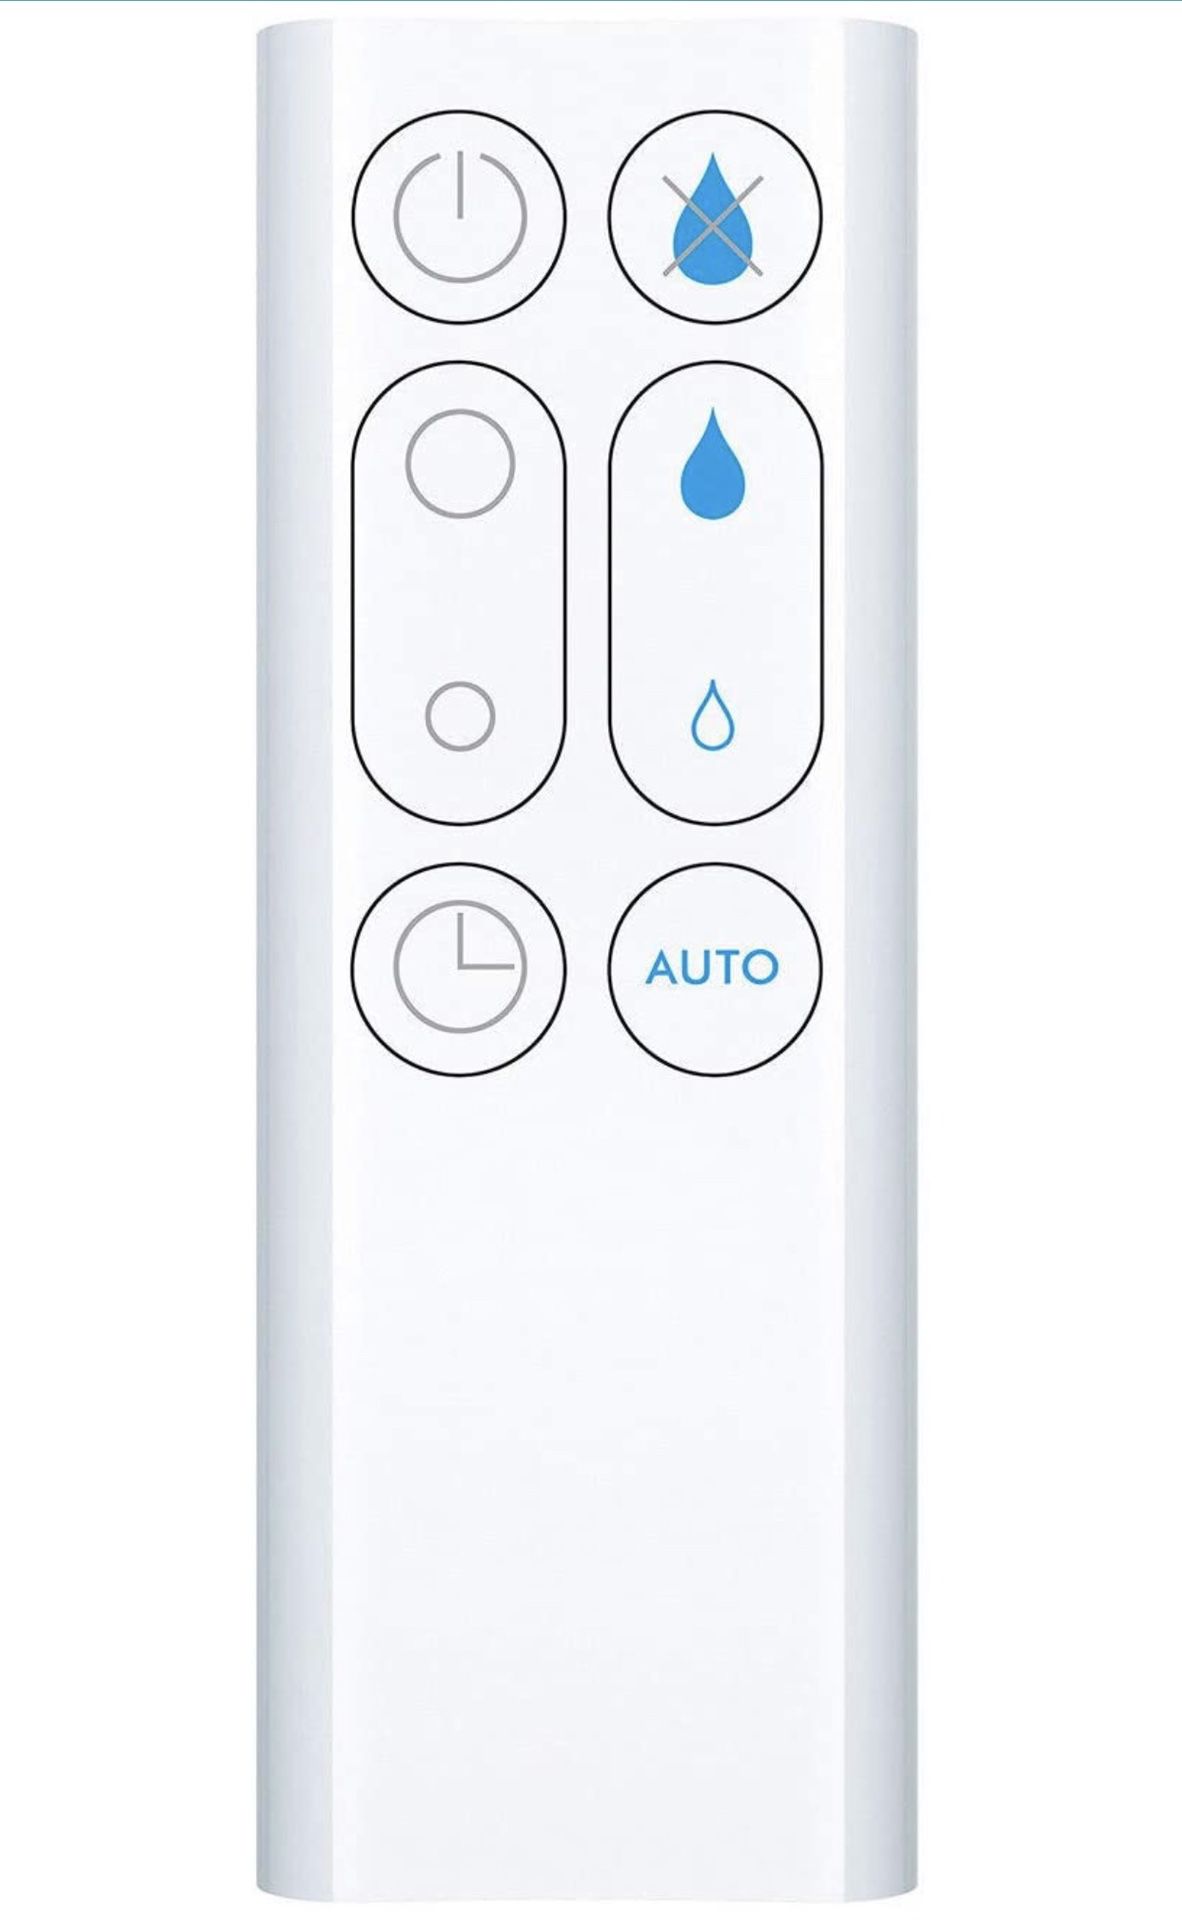 Dyson Replacement Remote Control 966569-06 for Dyson Humidifier White